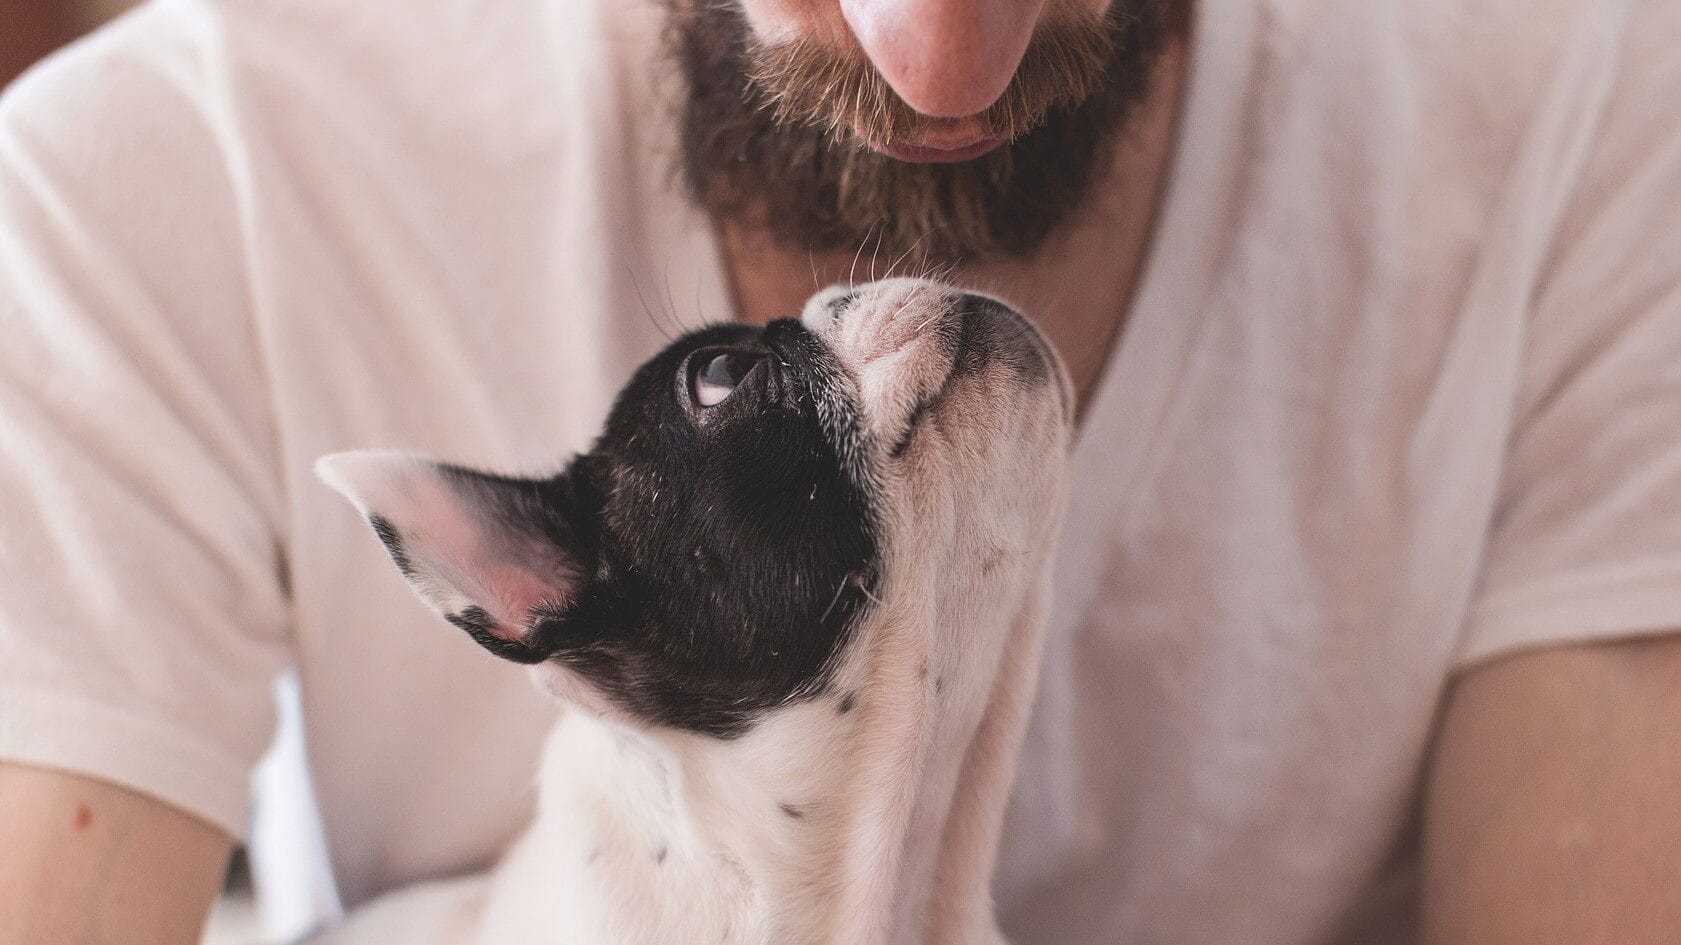 Image: dog and owner looking lovingly at each other